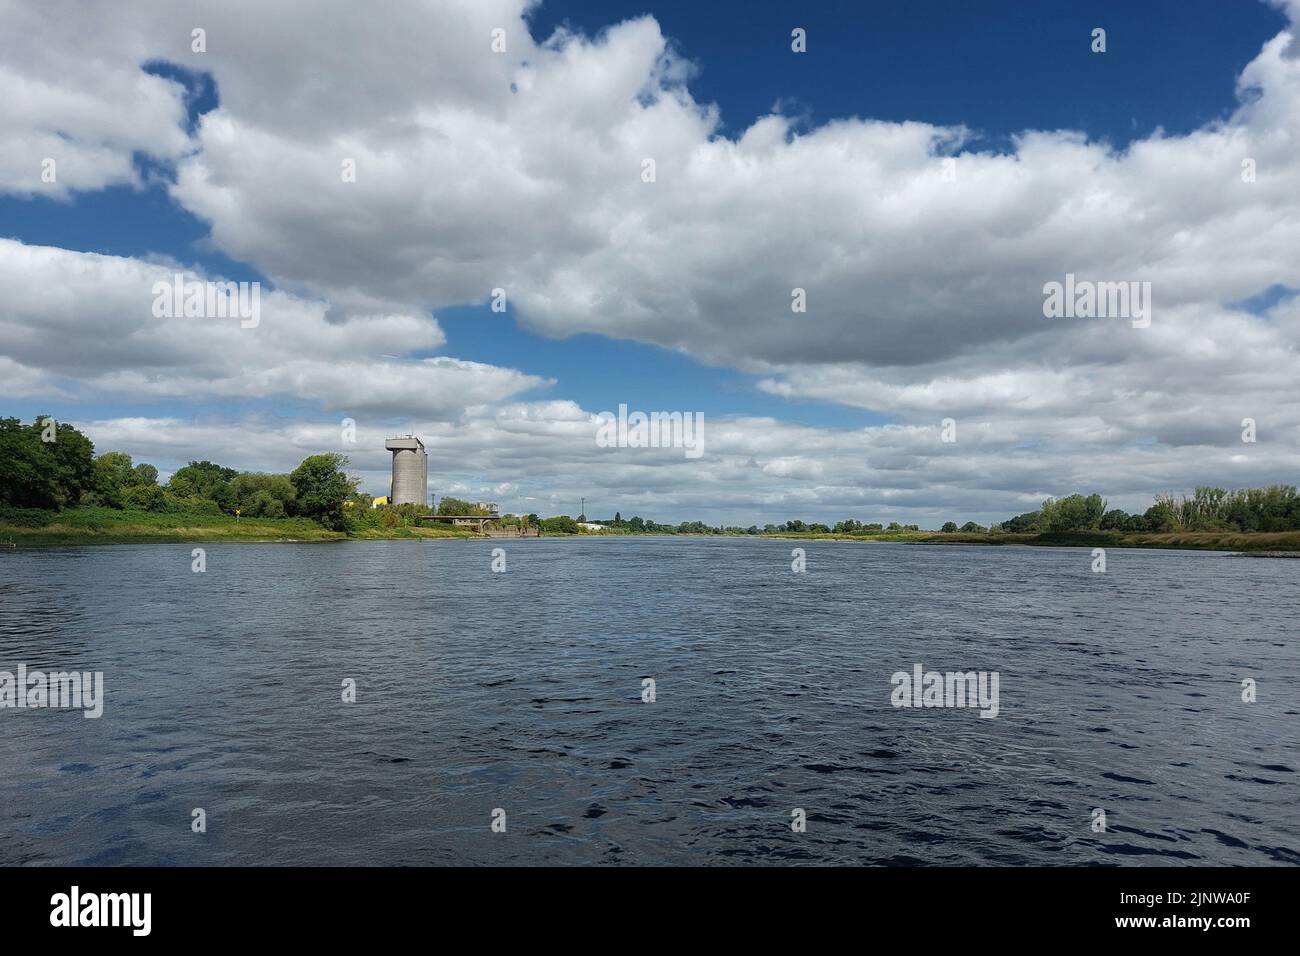 View over the Elbe river in Magdeburg, Germany. Stock Photo